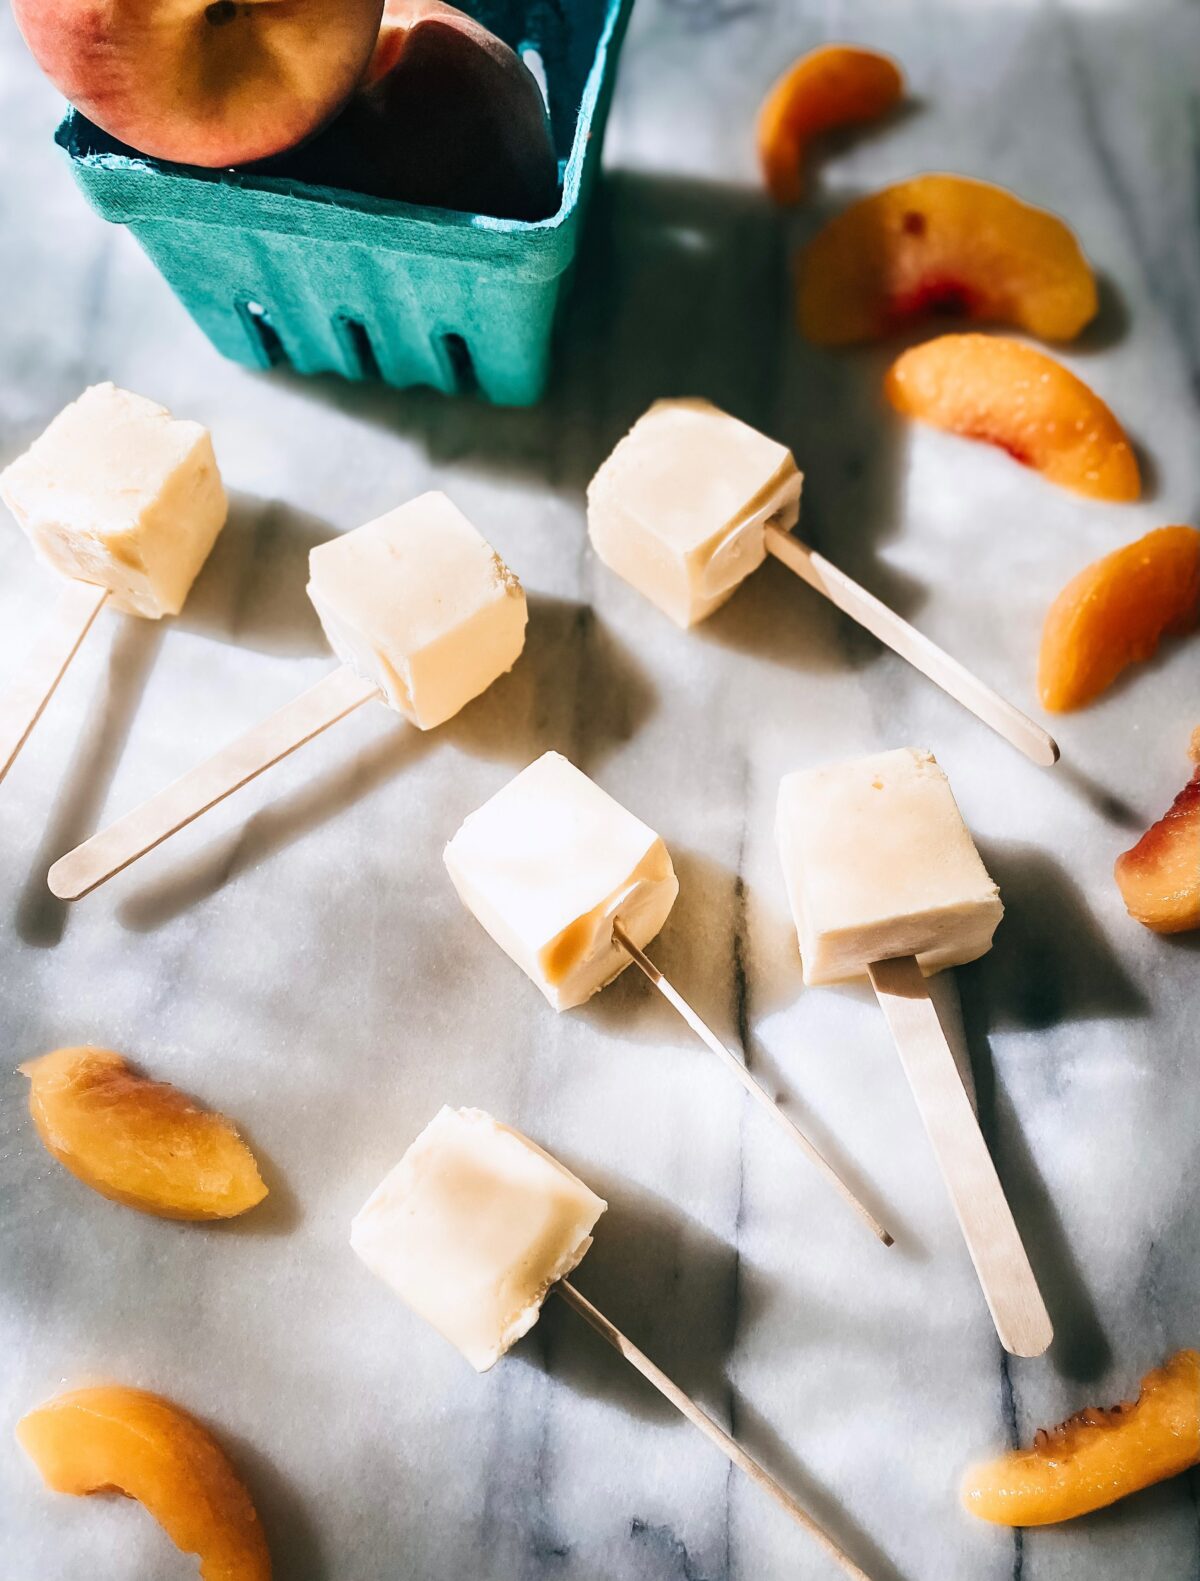 homemade peach pops on marble countertop
